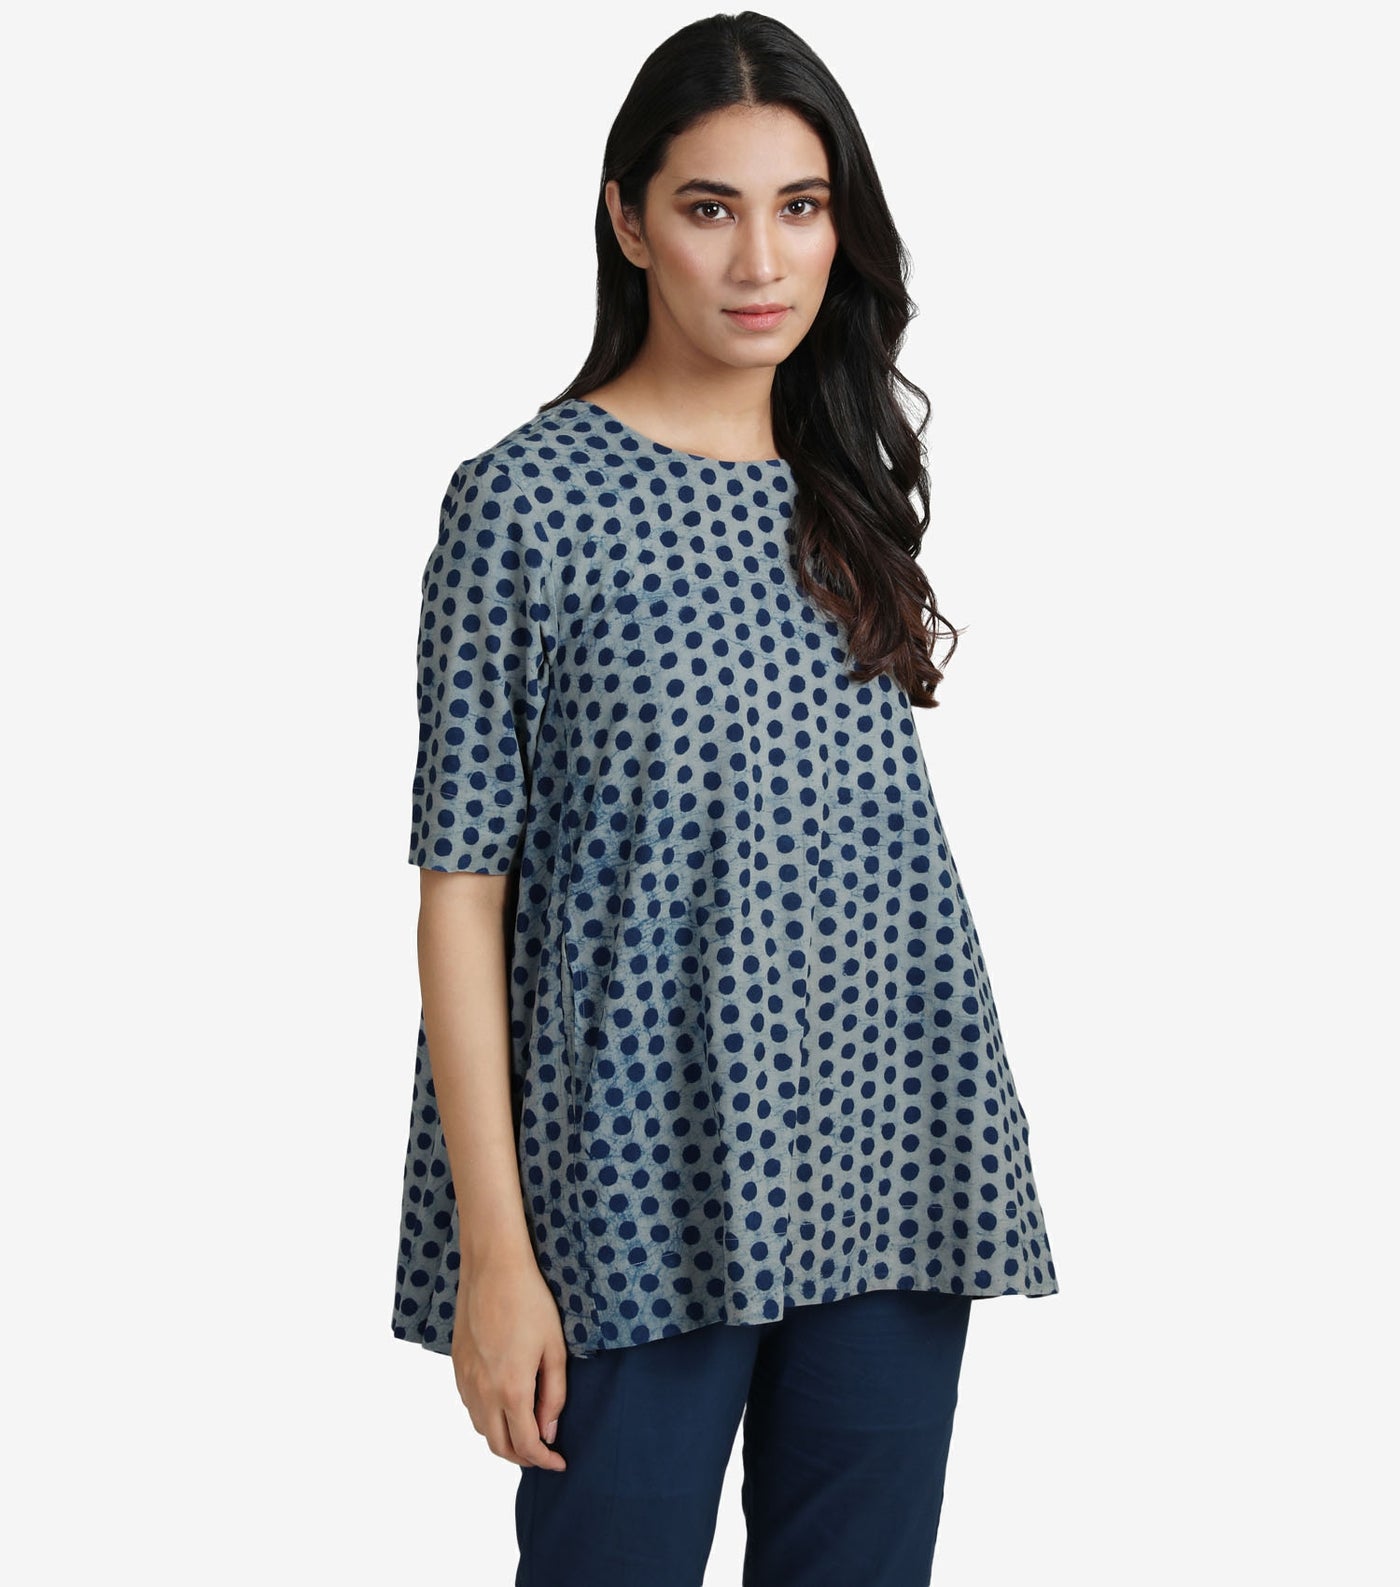 Blue printed cotton top